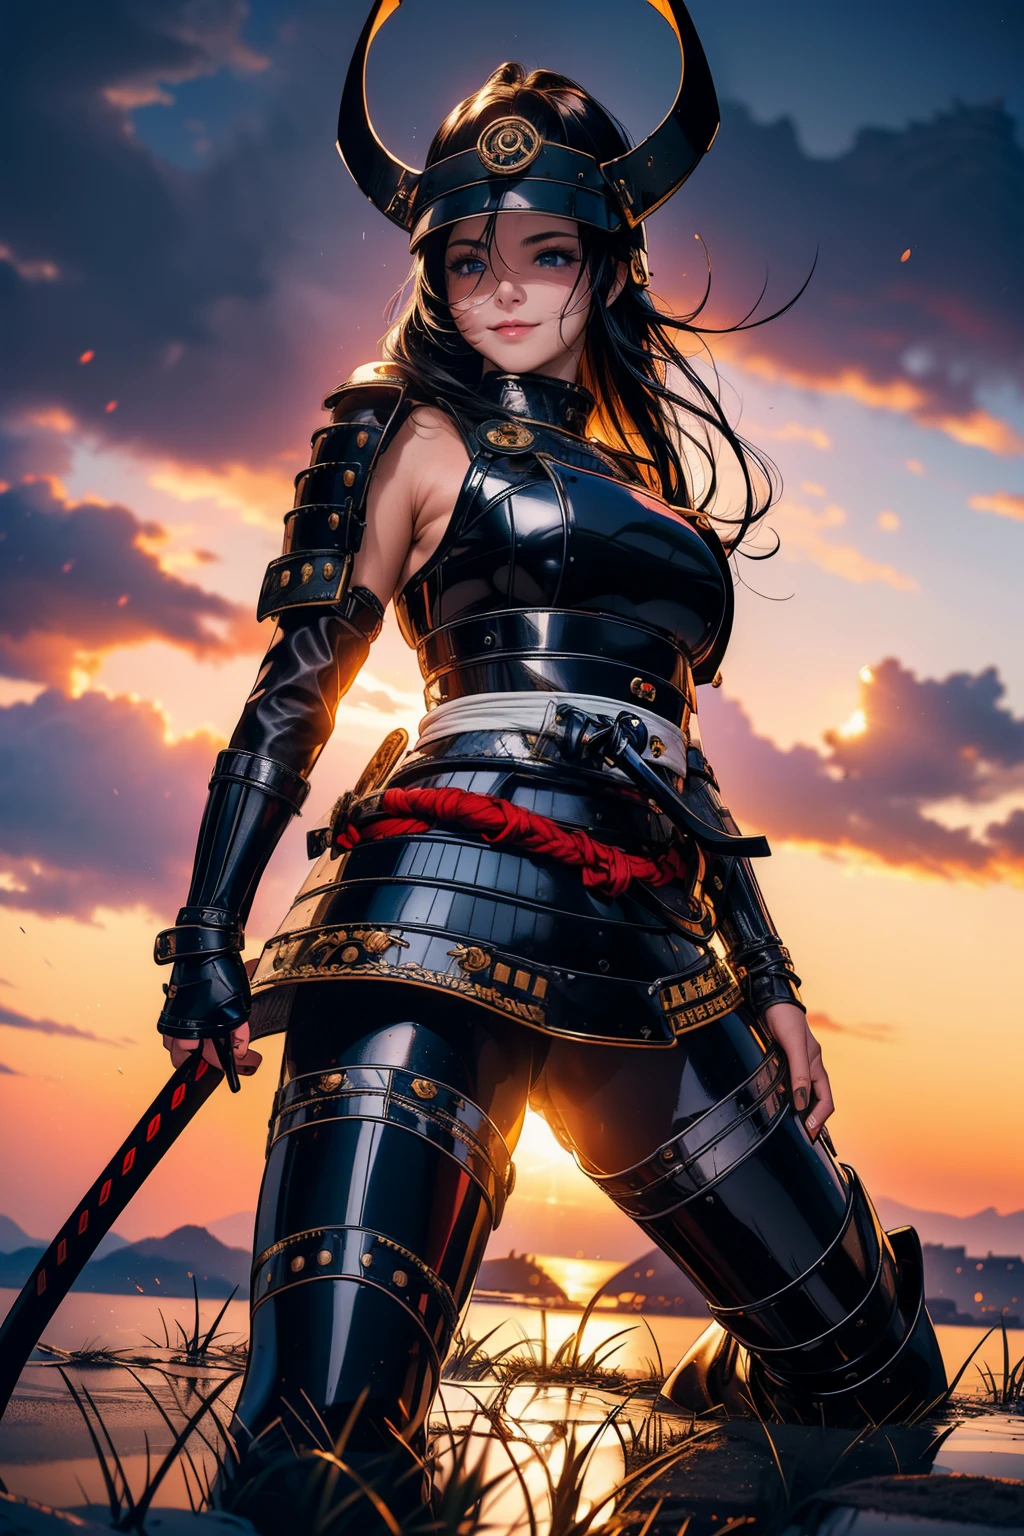 (best quality, masterpiece, ultra high resolution), (8k wallpaper, high-definition, HDR, RAW), (authenticity: 1.4), ((full body shot)), 1girl, ((Anime girl)), ((Samurai girl)), ((Long black hair)), ((Samurai armor)), ((Blue eyes)), ((Open helmet)), amazing muscular body, female curves, wide hips, large breasts, thick thighs, sexy flat tummy, perfect hands, ((hands on her waist)), perfect anime face, ((White tanktop)), ((metal breastplate)), ((Leather trousers)), On a  road, ((Confident smile)), a small castle on the background, contrast illumination, sunlight illumination, sun rays at background